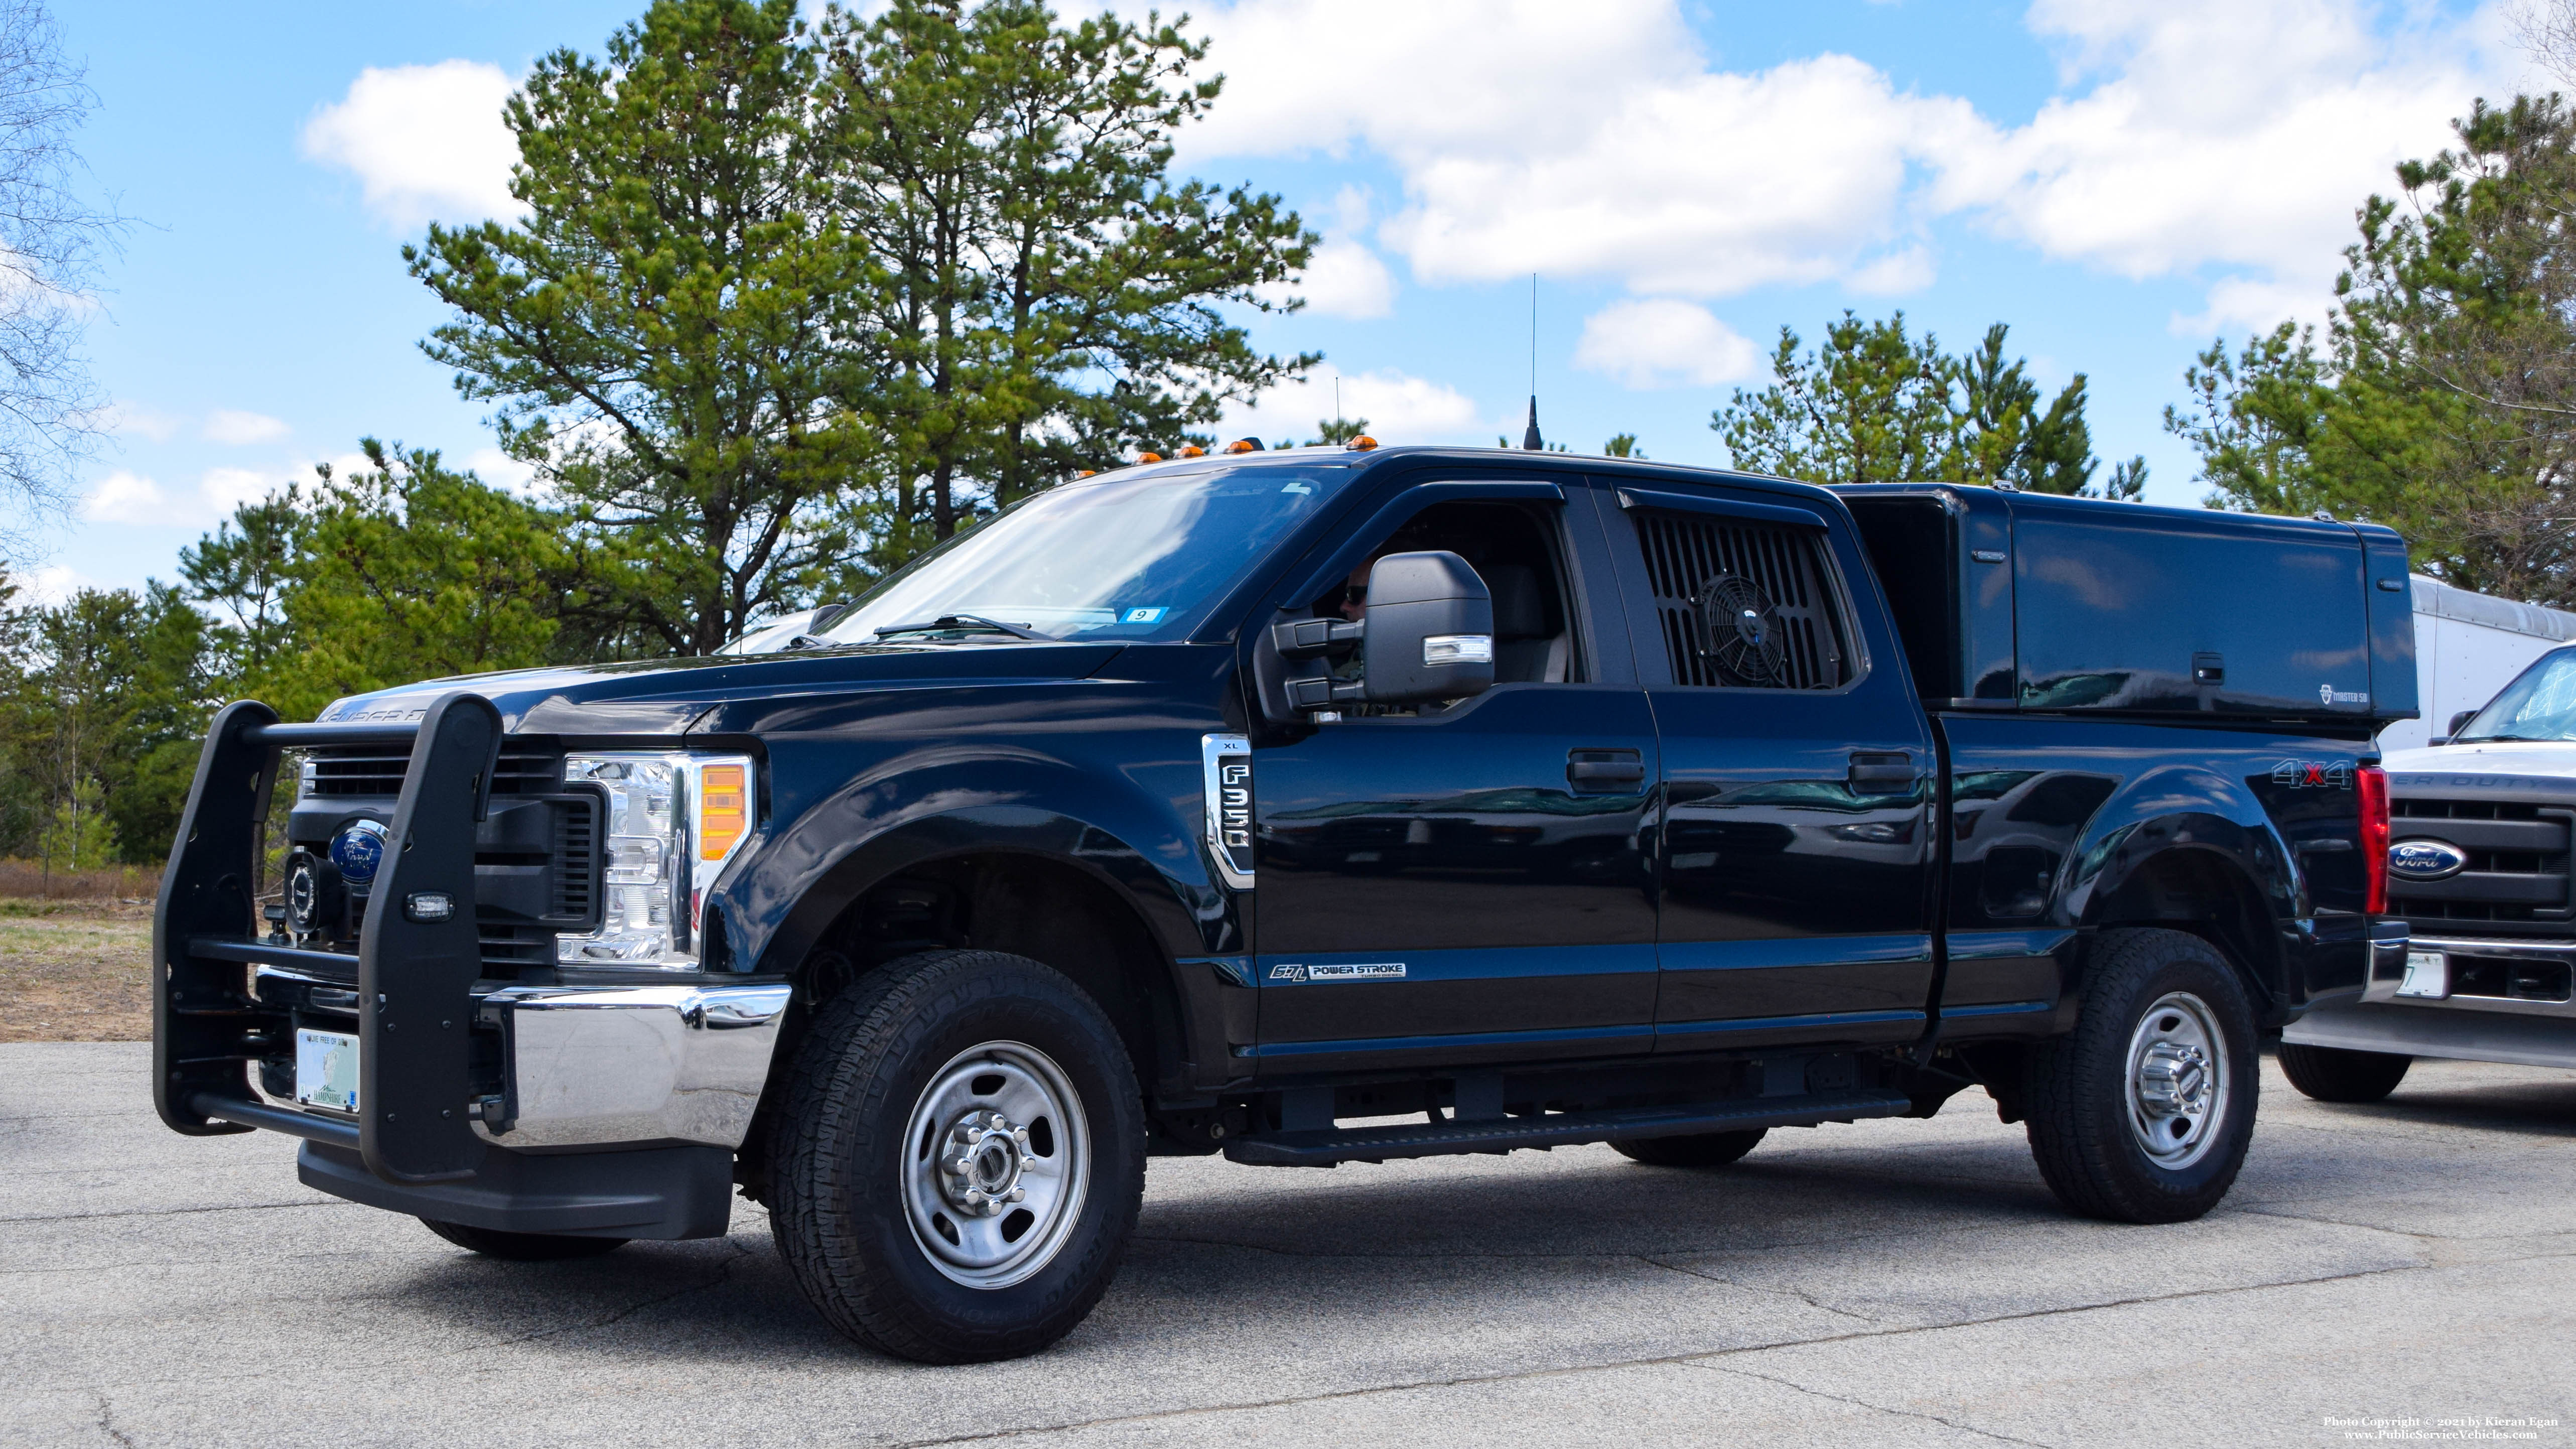 A photo  of New Hampshire State Police
            Cruiser 85, a 2017 Ford F-350 XL Crew Cab             taken by Kieran Egan